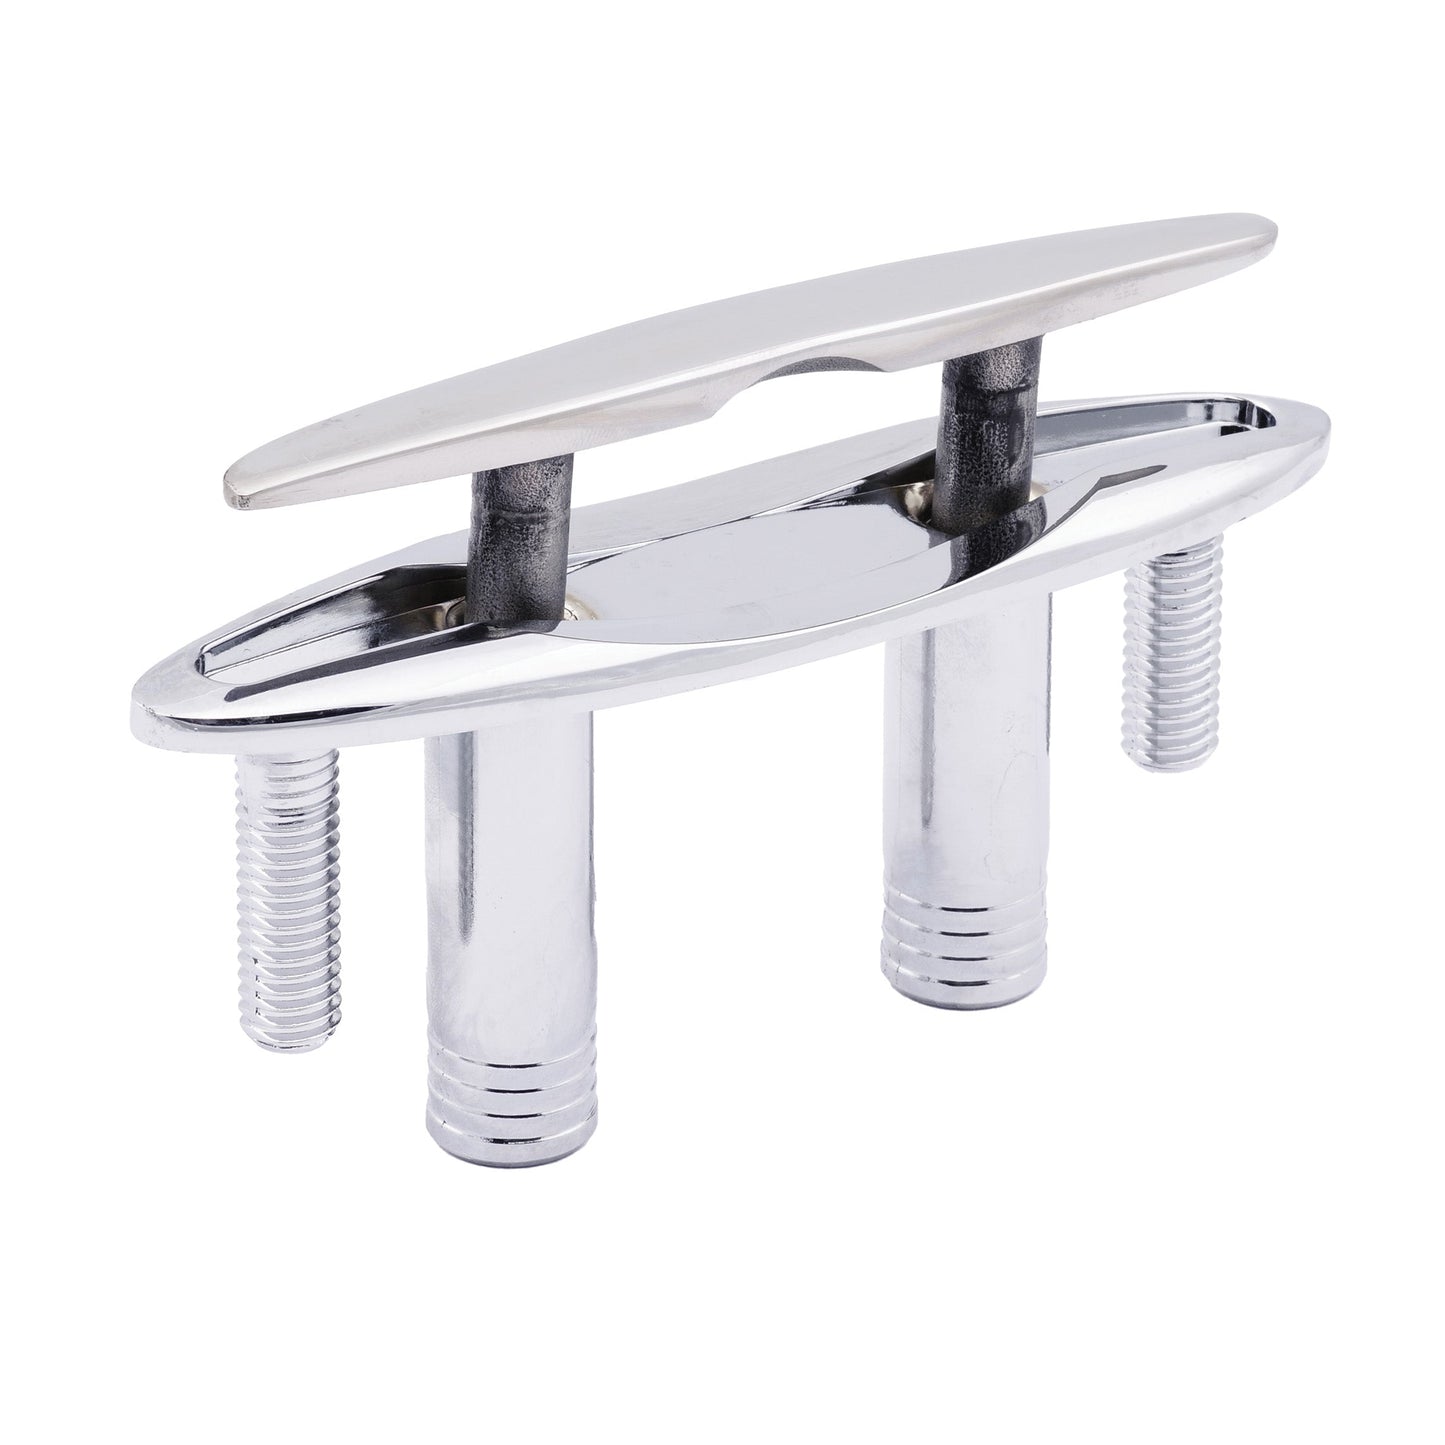 6" Stainless Steel E-Z Pull Up Cleat